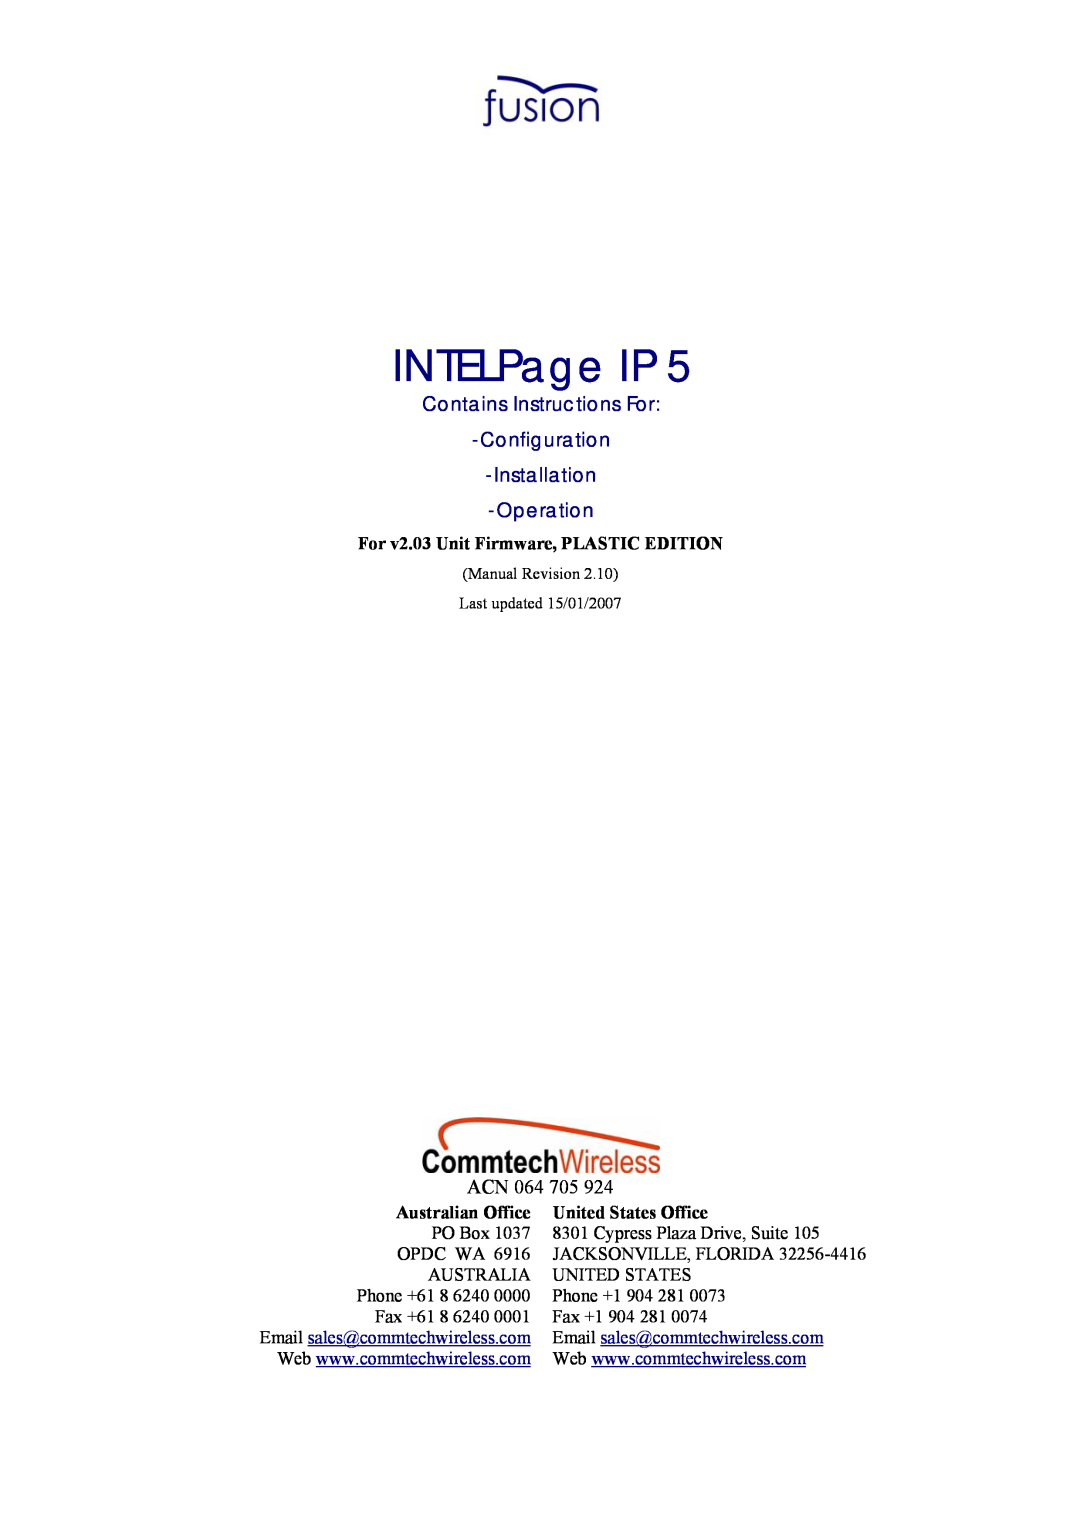 Fusion INTELPage IP 5, 2.1 manual Contains Instructions For Configuration, Installation -Operation 